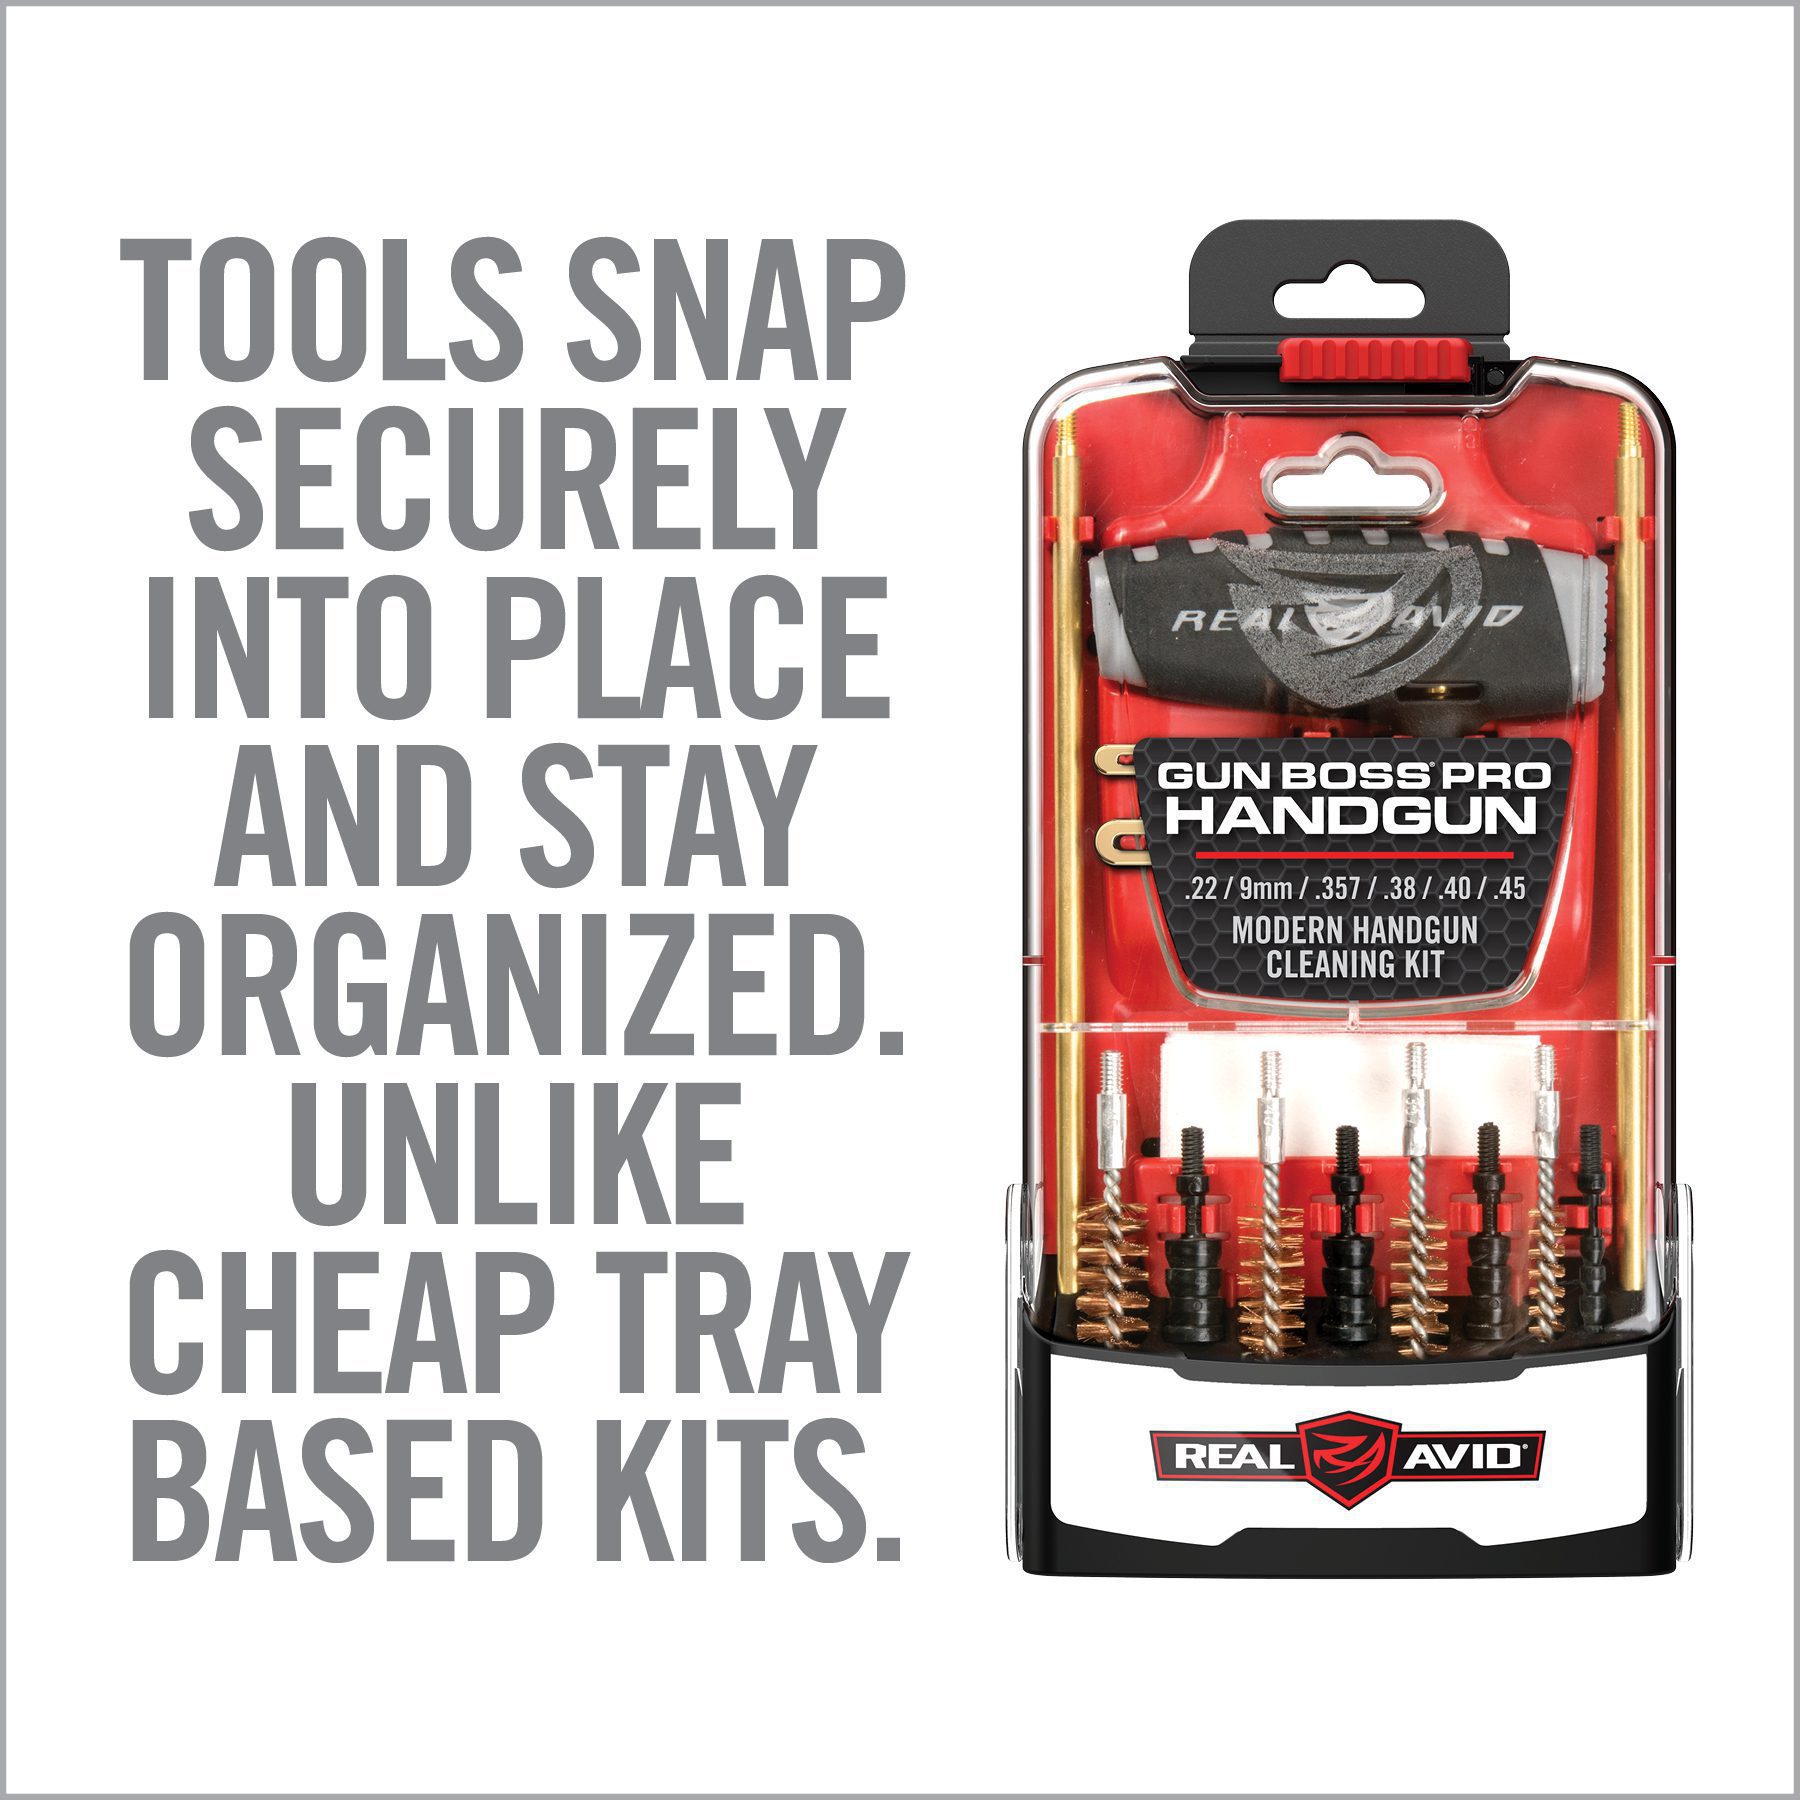 an ad for tools snap security into place and stay organized